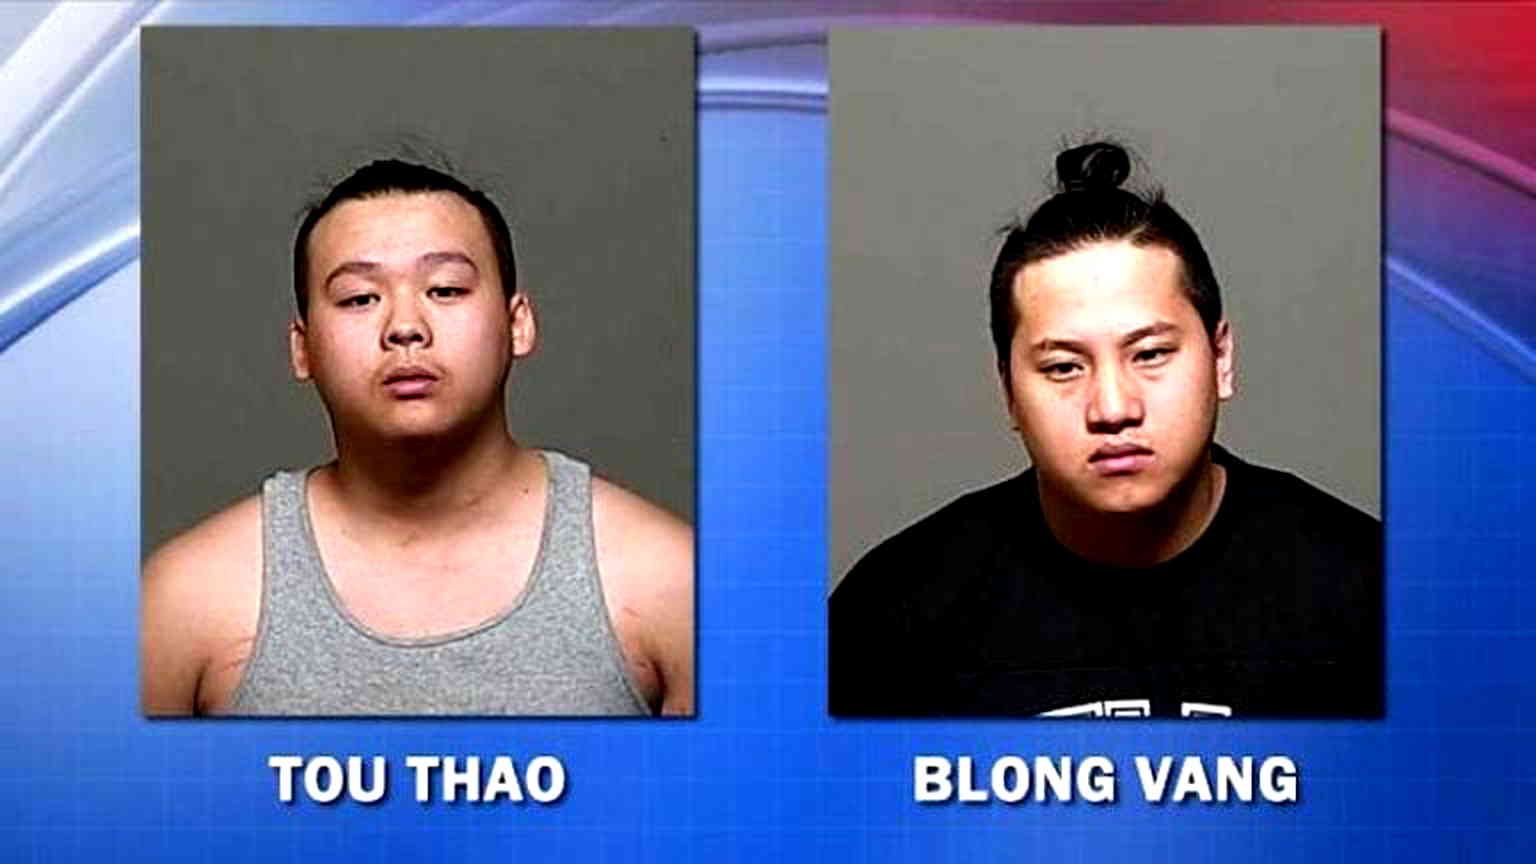 Two Men Charged for Bringing Guns to Wisconsin High School to Confront Girlfriend’s Bully